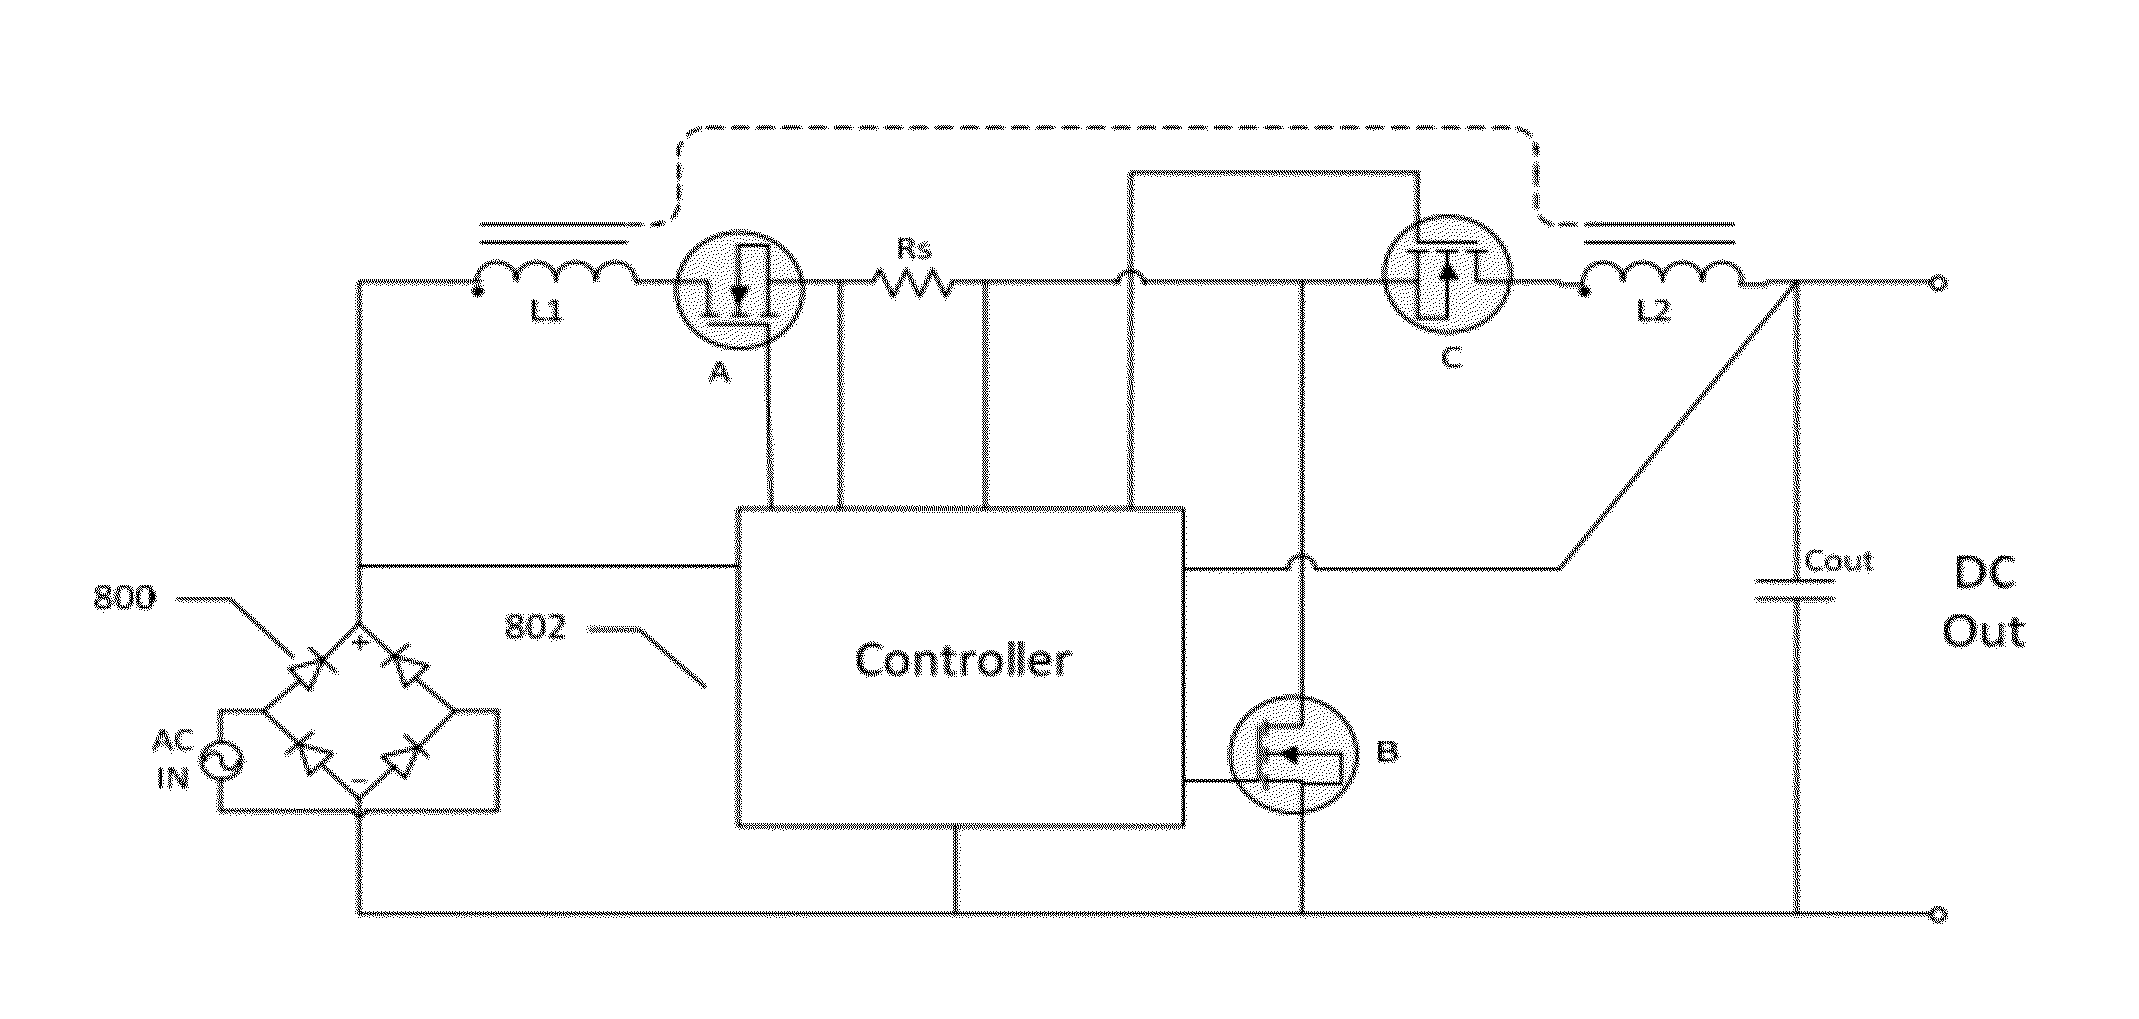 Apparatus and method for efficient dc-to-dc conversion through wide voltage swings